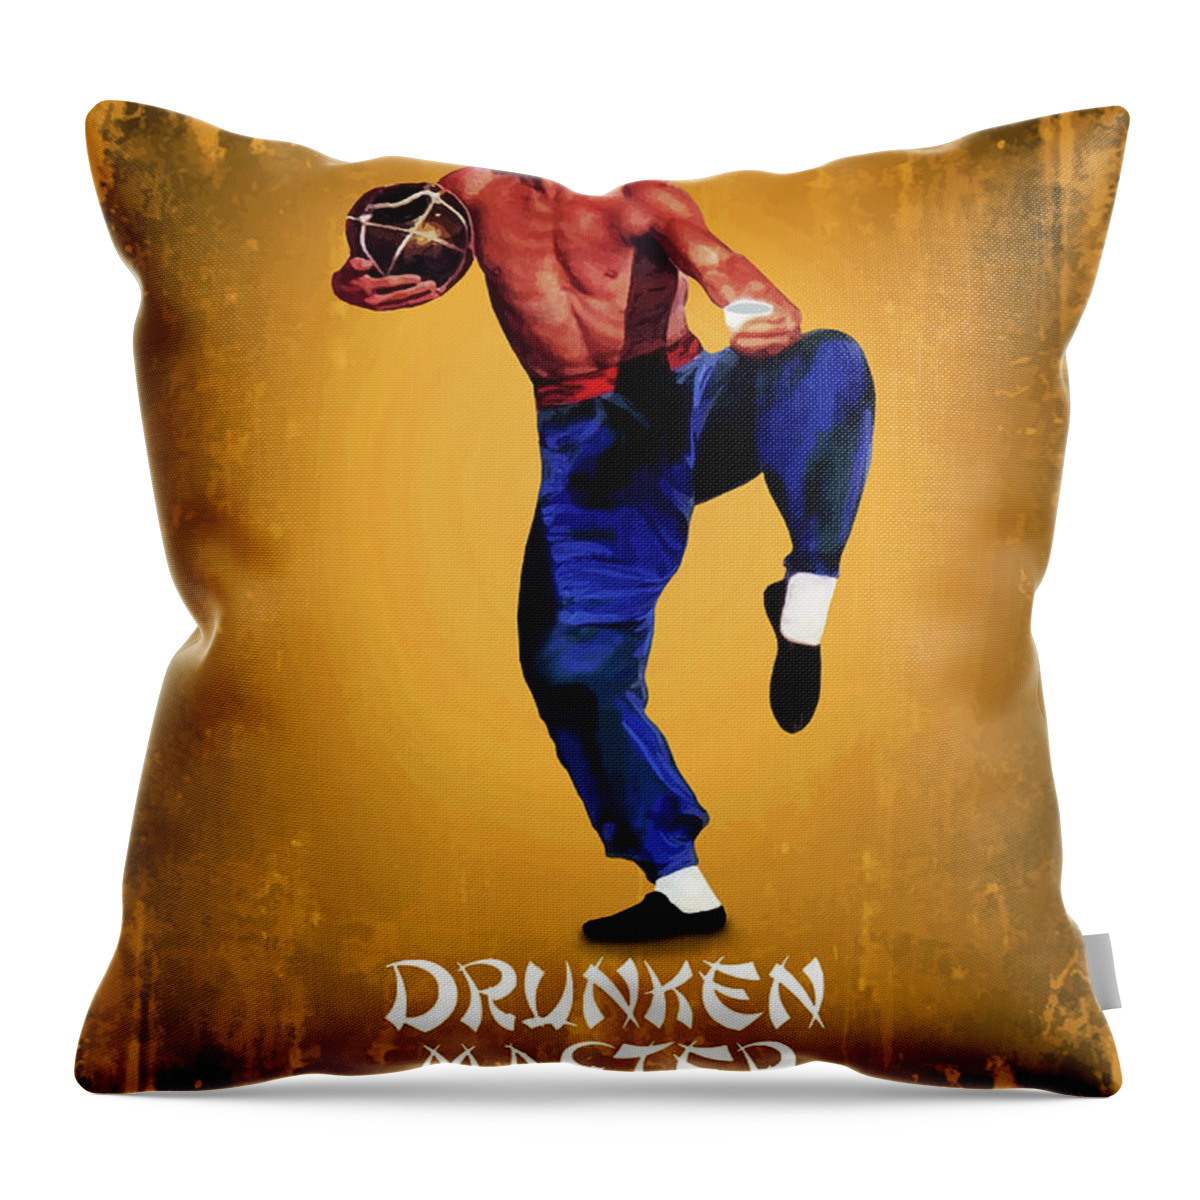 Movie Poster Throw Pillow featuring the digital art Drunken Master by Bo Kev